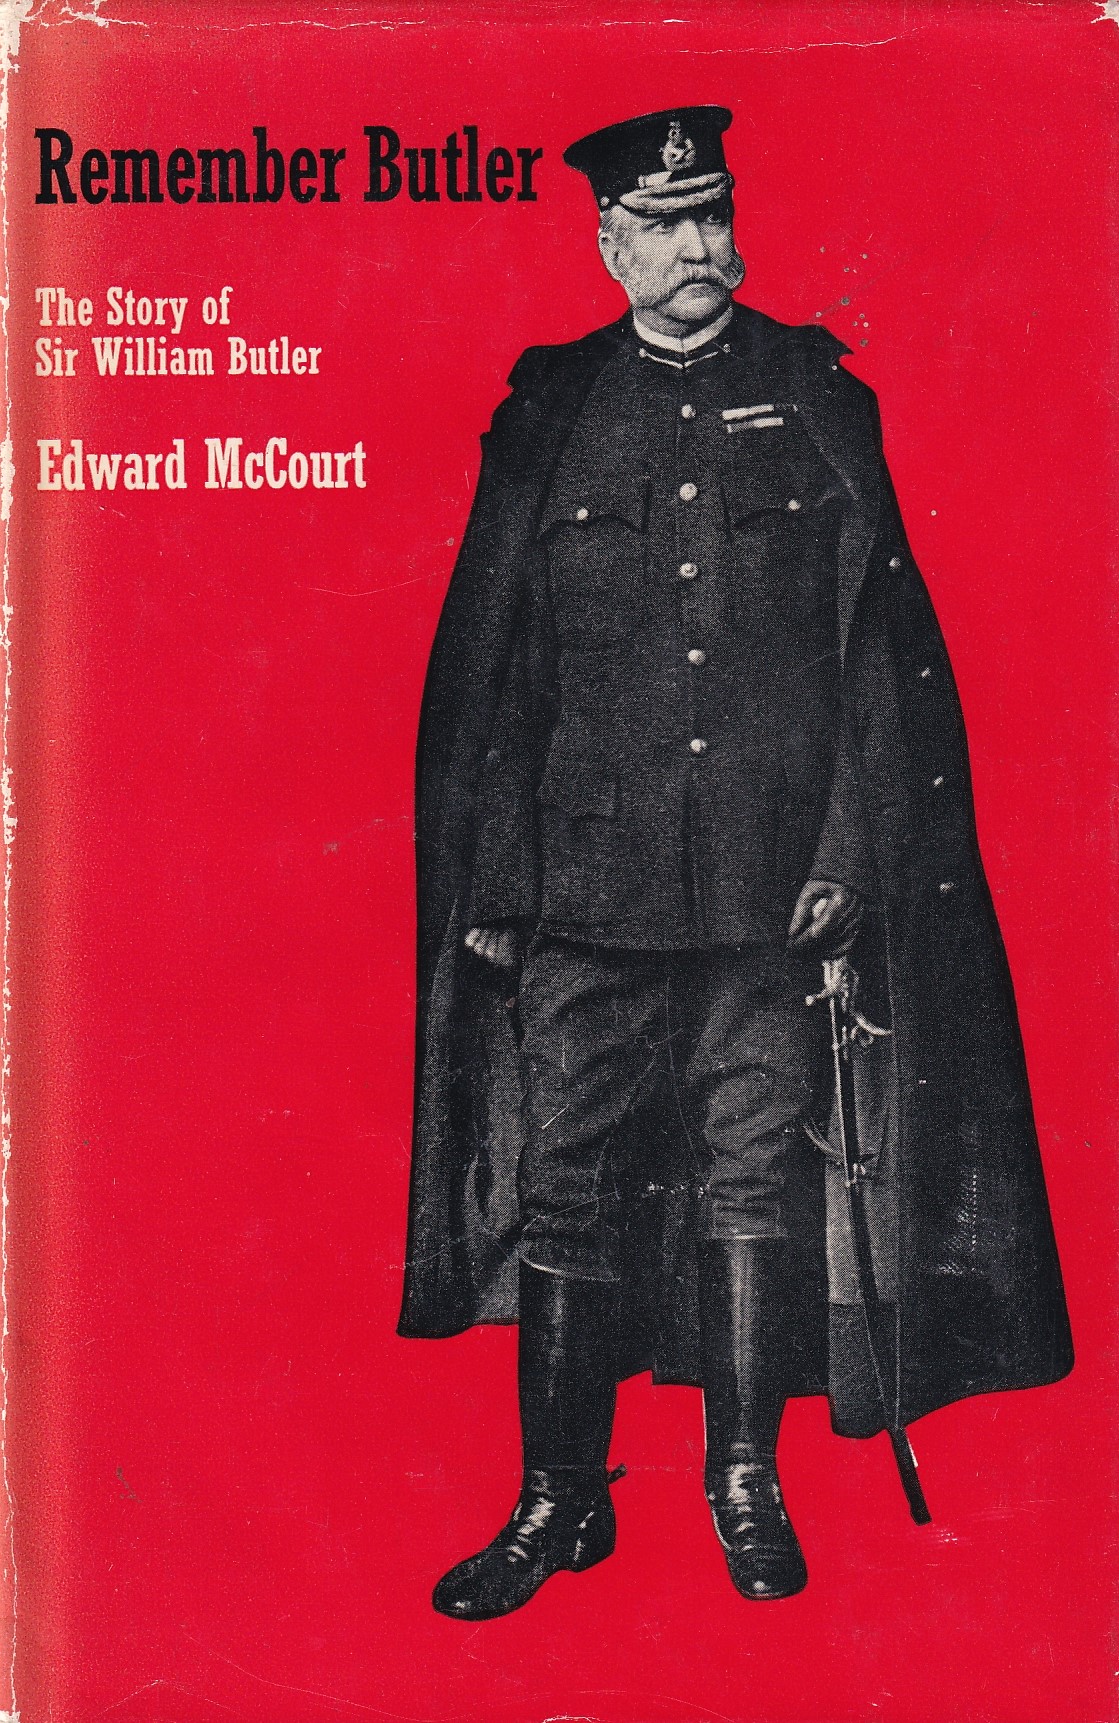 Remember Butler: The Story of Sir William Butler by Edward McCourt